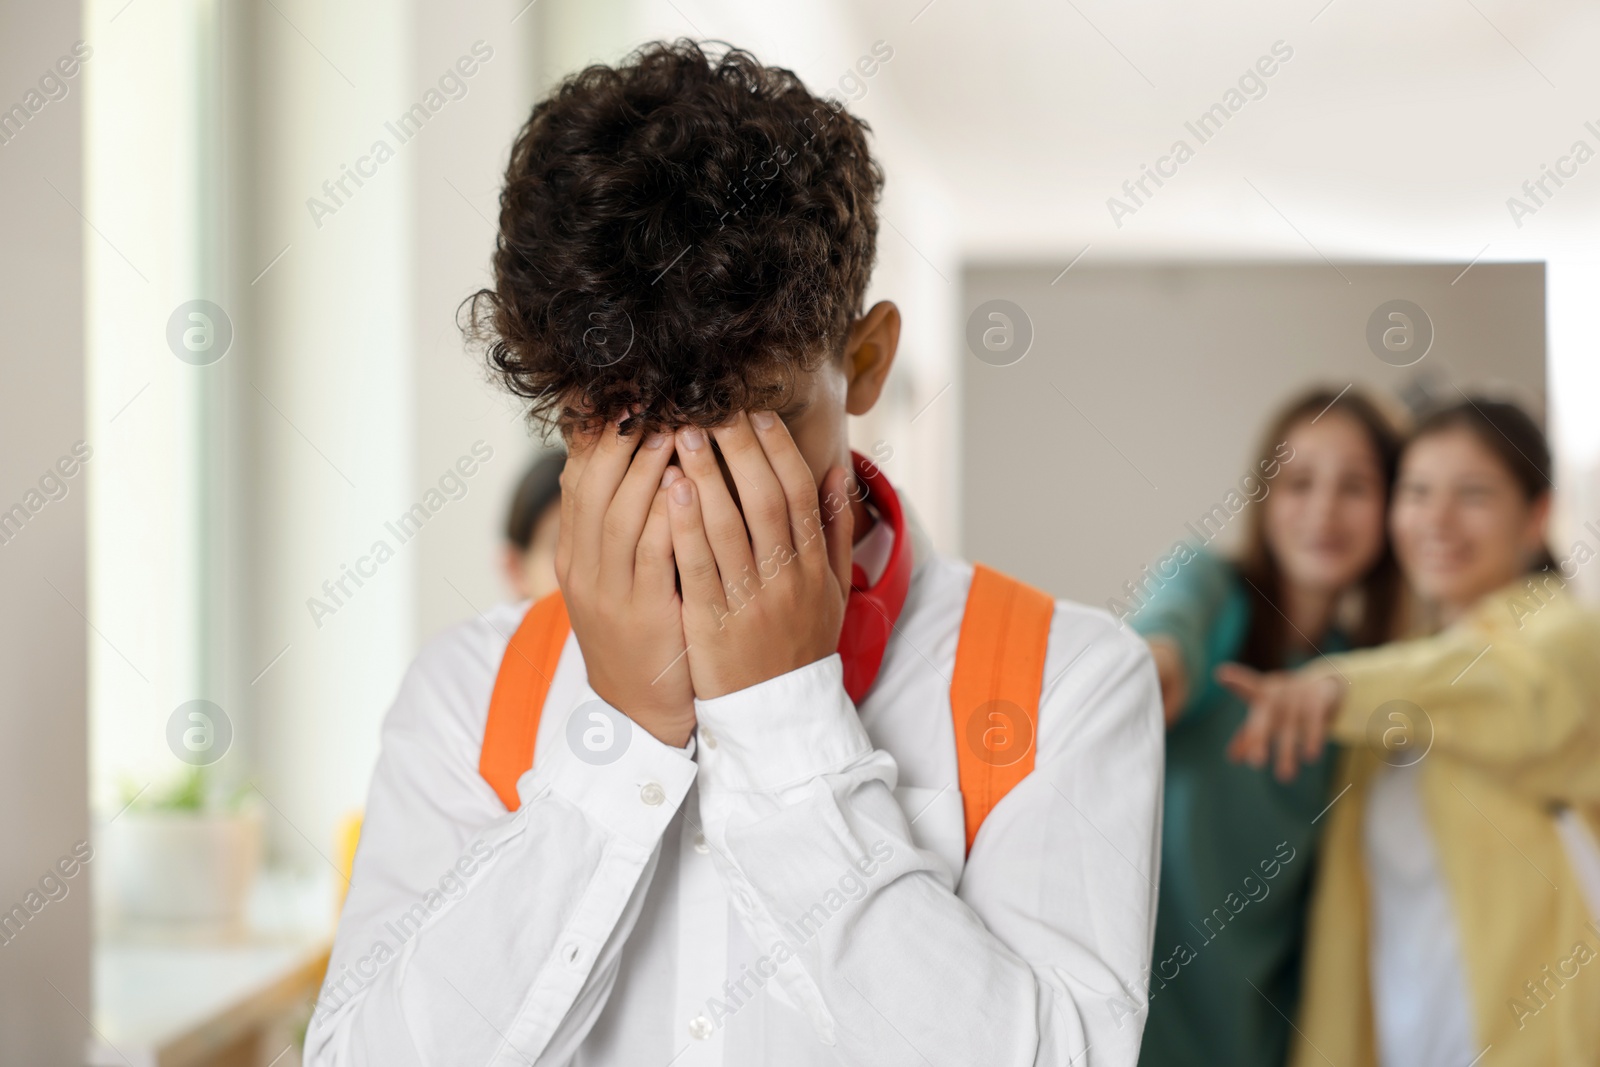 Photo of Teen problems. Students pointing at upset boy at school, selective focus